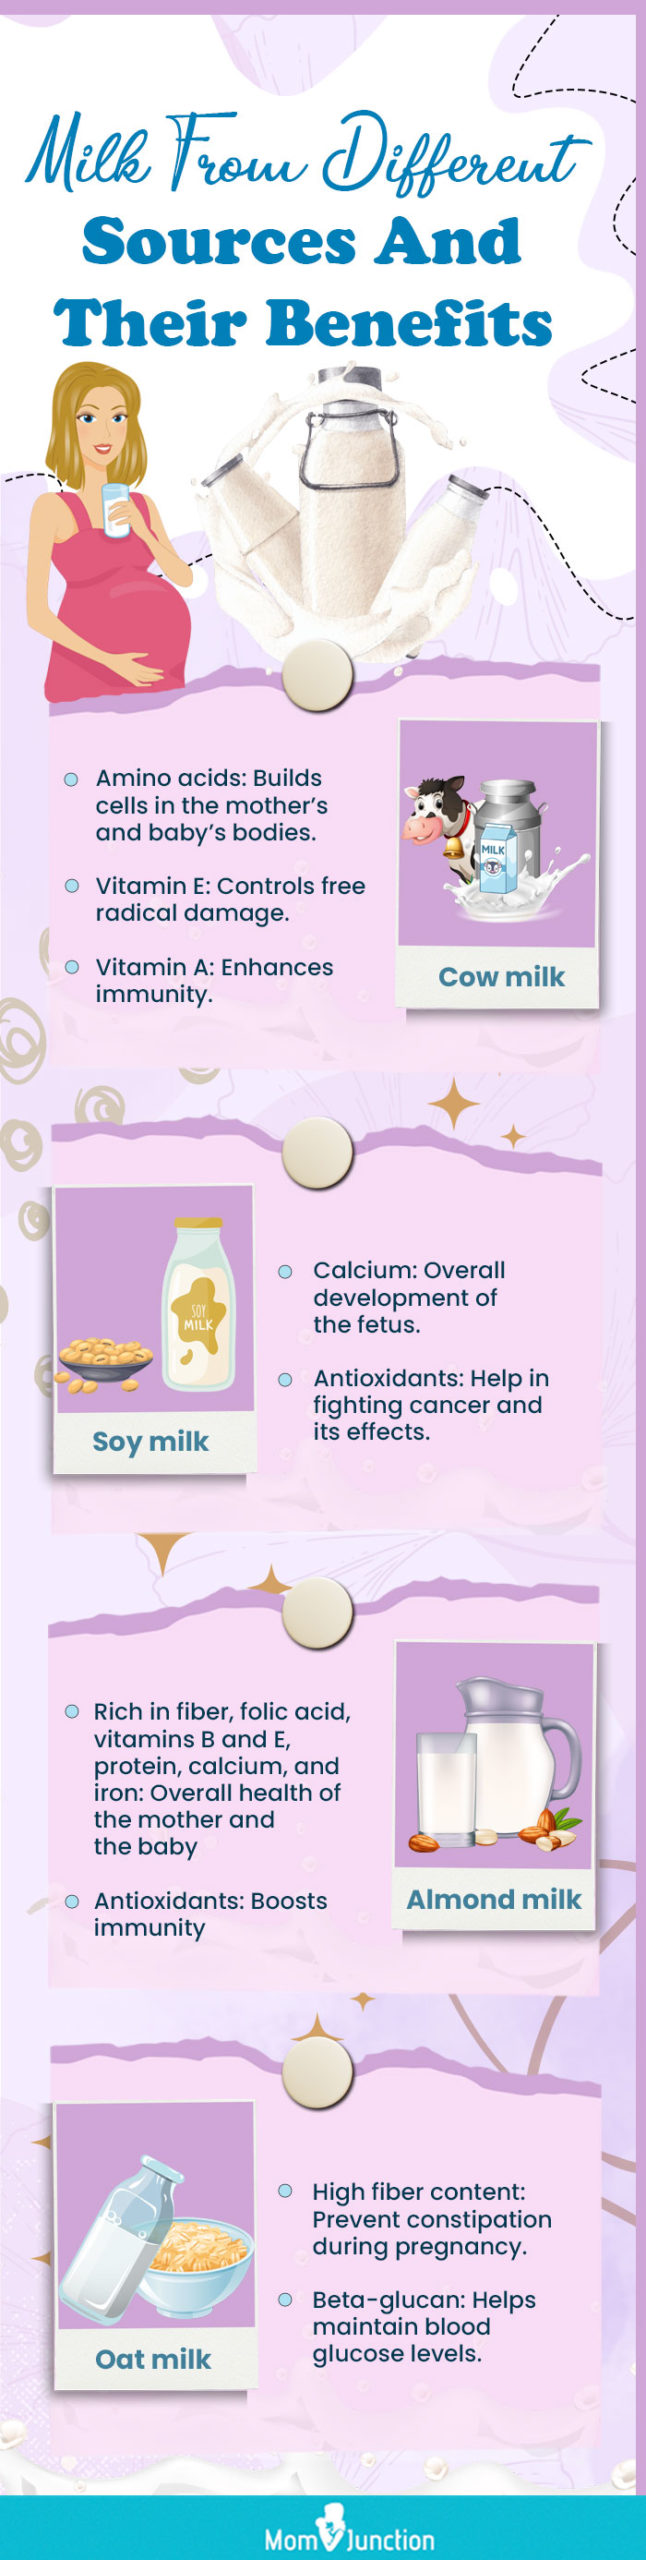 Is It Safe to Drink Cow Milk During Pregnancy: What You Need to Know